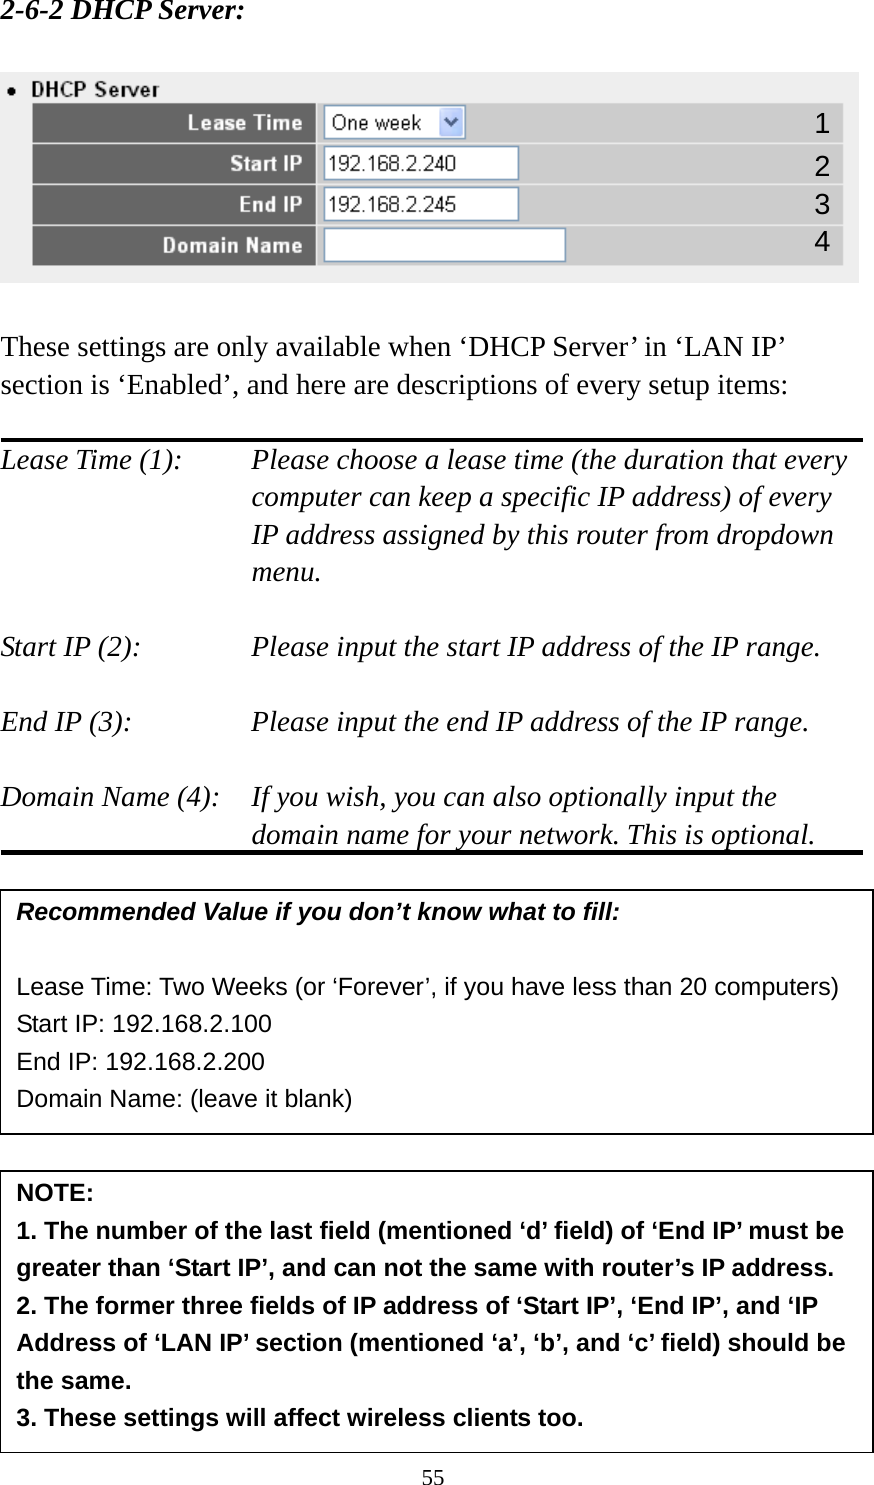 55 2-6-2 DHCP Server:    These settings are only available when ‘DHCP Server’ in ‘LAN IP’ section is ‘Enabled’, and here are descriptions of every setup items:  Lease Time (1):    Please choose a lease time (the duration that every computer can keep a specific IP address) of every IP address assigned by this router from dropdown menu.  Start IP (2):      Please input the start IP address of the IP range.  End IP (3):       Please input the end IP address of the IP range.  Domain Name (4):    If you wish, you can also optionally input the domain name for your network. This is optional.                Recommended Value if you don’t know what to fill:  Lease Time: Two Weeks (or ‘Forever’, if you have less than 20 computers) Start IP: 192.168.2.100 End IP: 192.168.2.200 Domain Name: (leave it blank) NOTE:  1. The number of the last field (mentioned ‘d’ field) of ‘End IP’ must be greater than ‘Start IP’, and can not the same with router’s IP address. 2. The former three fields of IP address of ‘Start IP’, ‘End IP’, and ‘IP Address of ‘LAN IP’ section (mentioned ‘a’, ‘b’, and ‘c’ field) should be the same. 3. These settings will affect wireless clients too. 1 3 4 2 